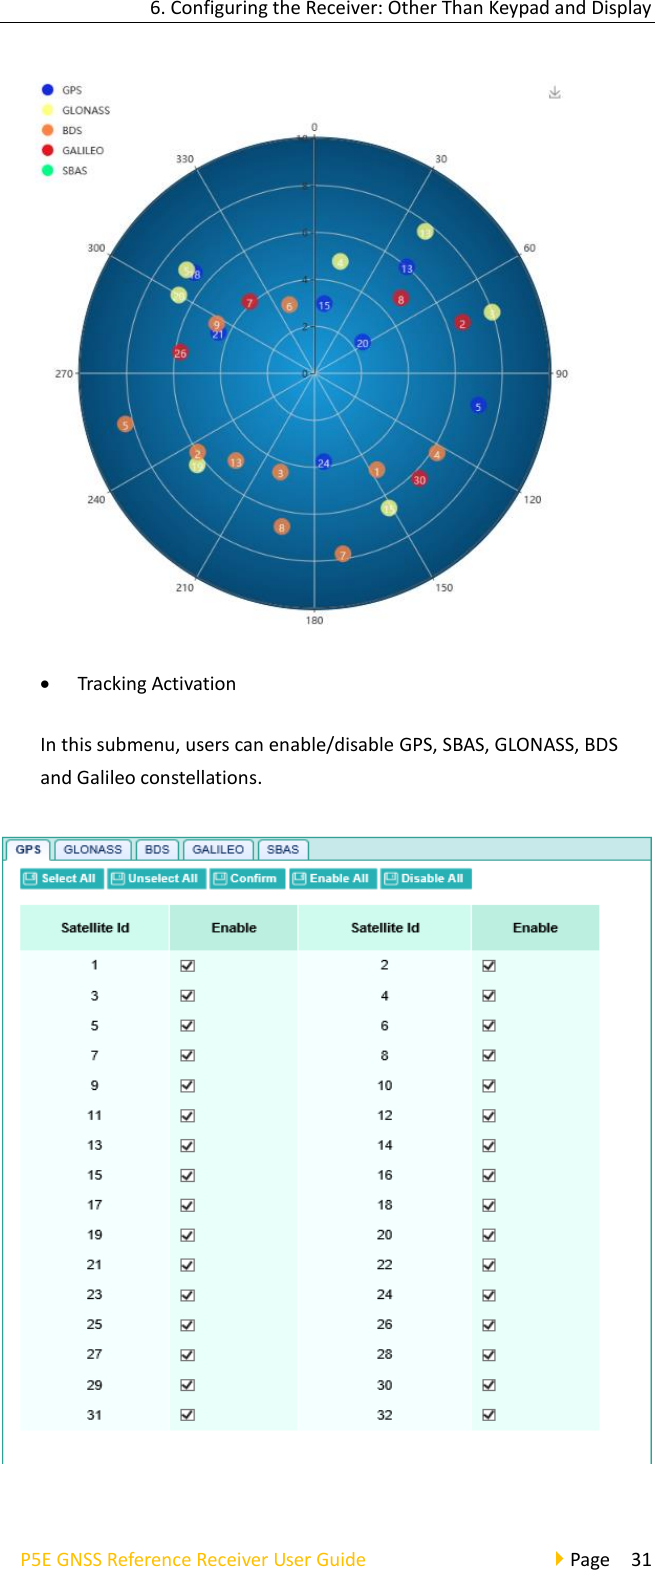 6. Configuring the Receiver: Other Than Keypad and Display P5E GNSS Reference Receiver User Guide                                     Page  31  • Tracking Activation In this submenu, users can enable/disable GPS, SBAS, GLONASS, BDS and Galileo constellations.    